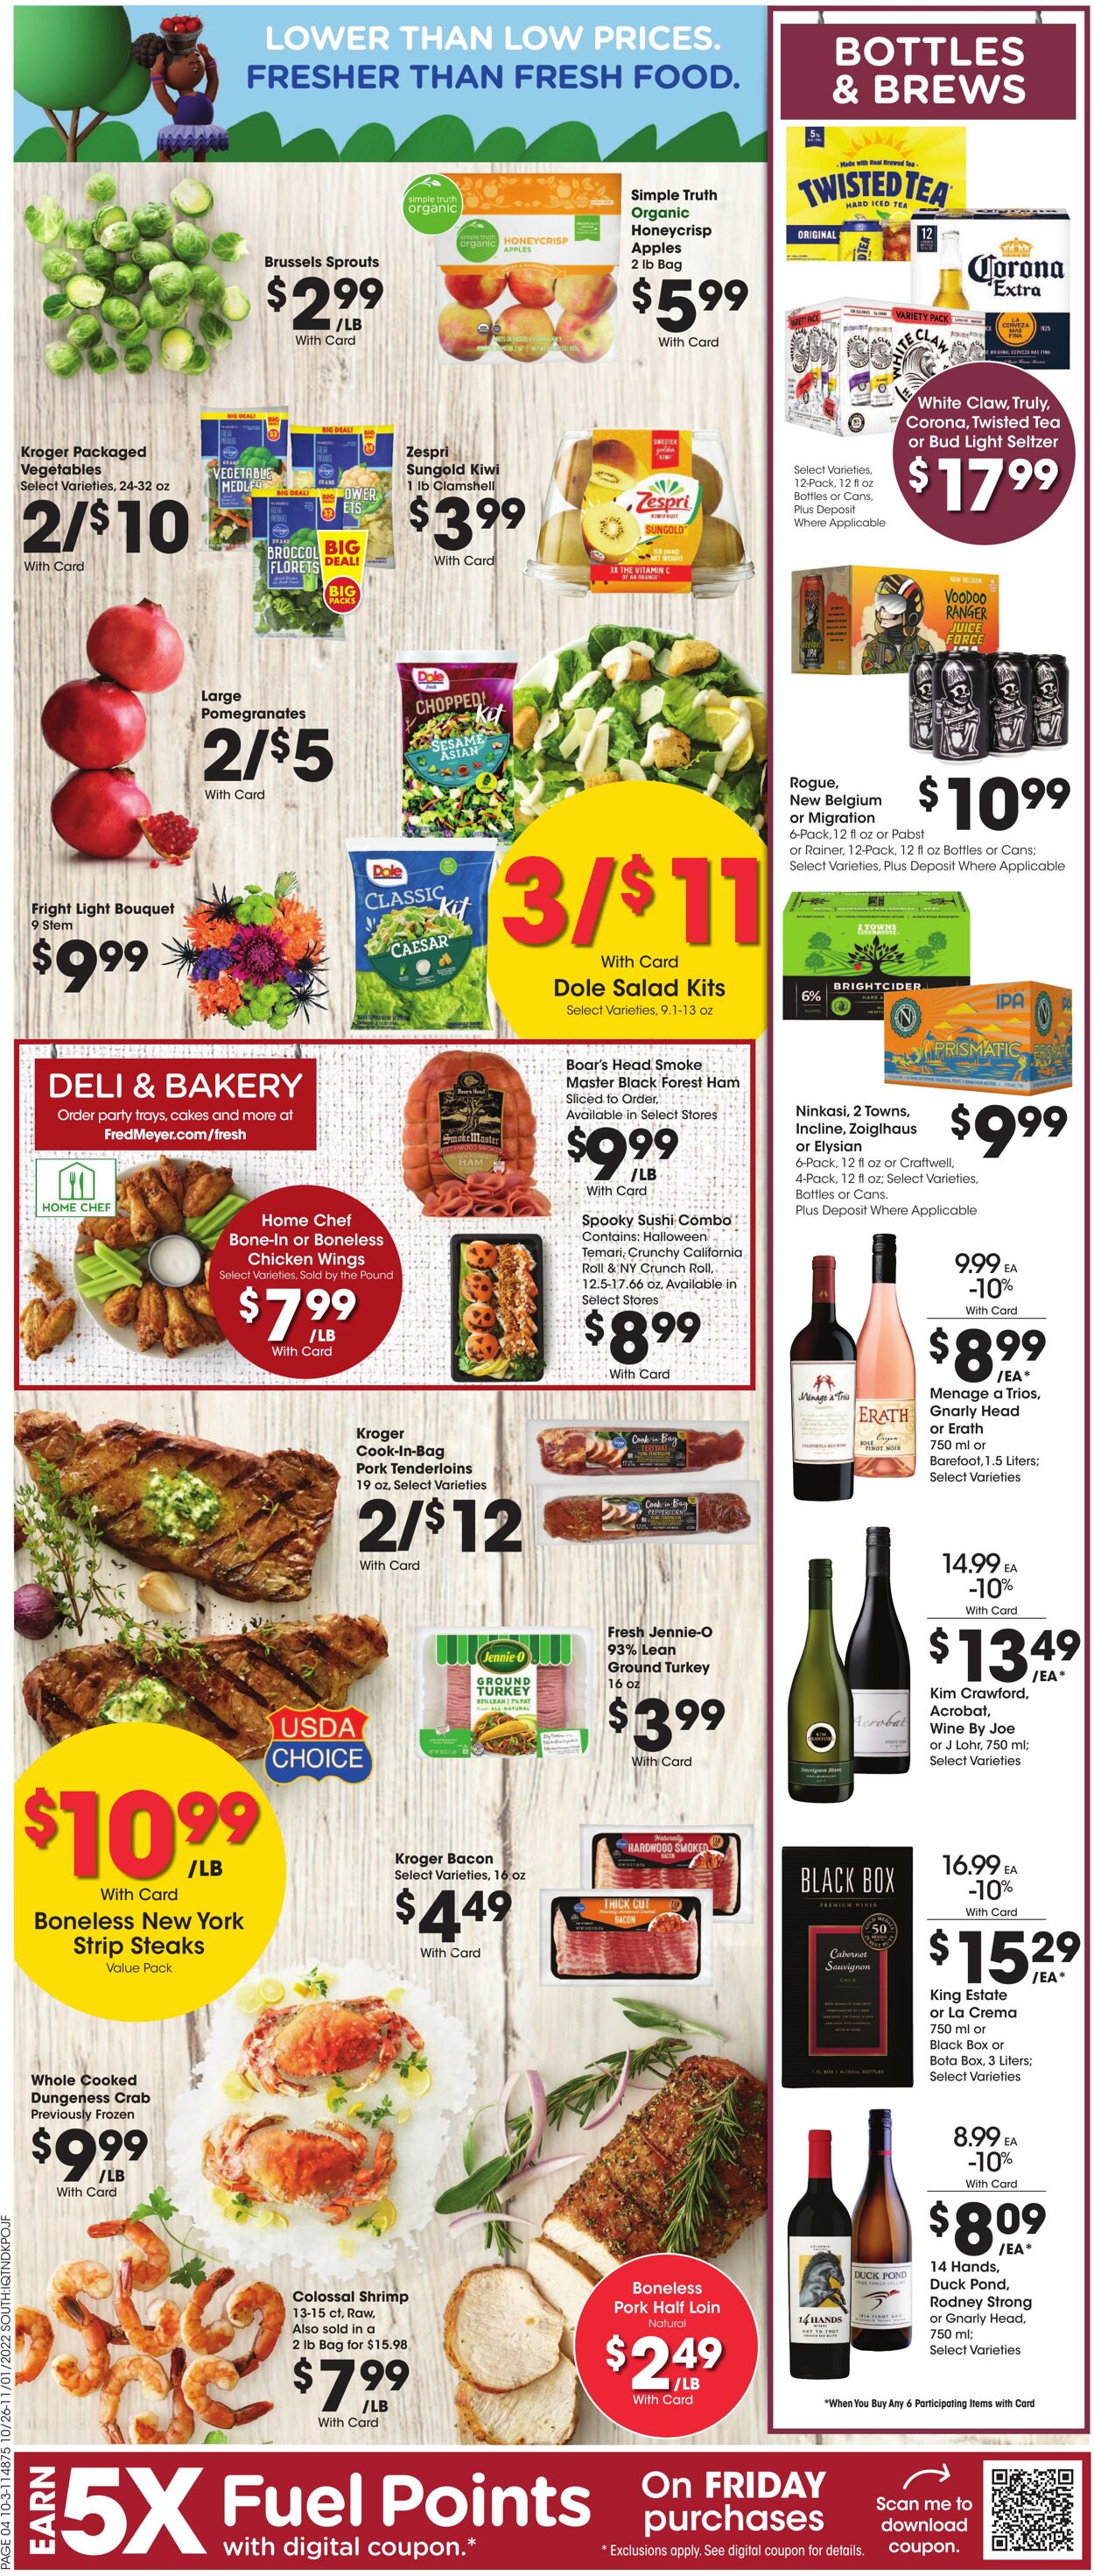 Weekly ad Fred Meyer 10/26/2022 - 11/01/2022